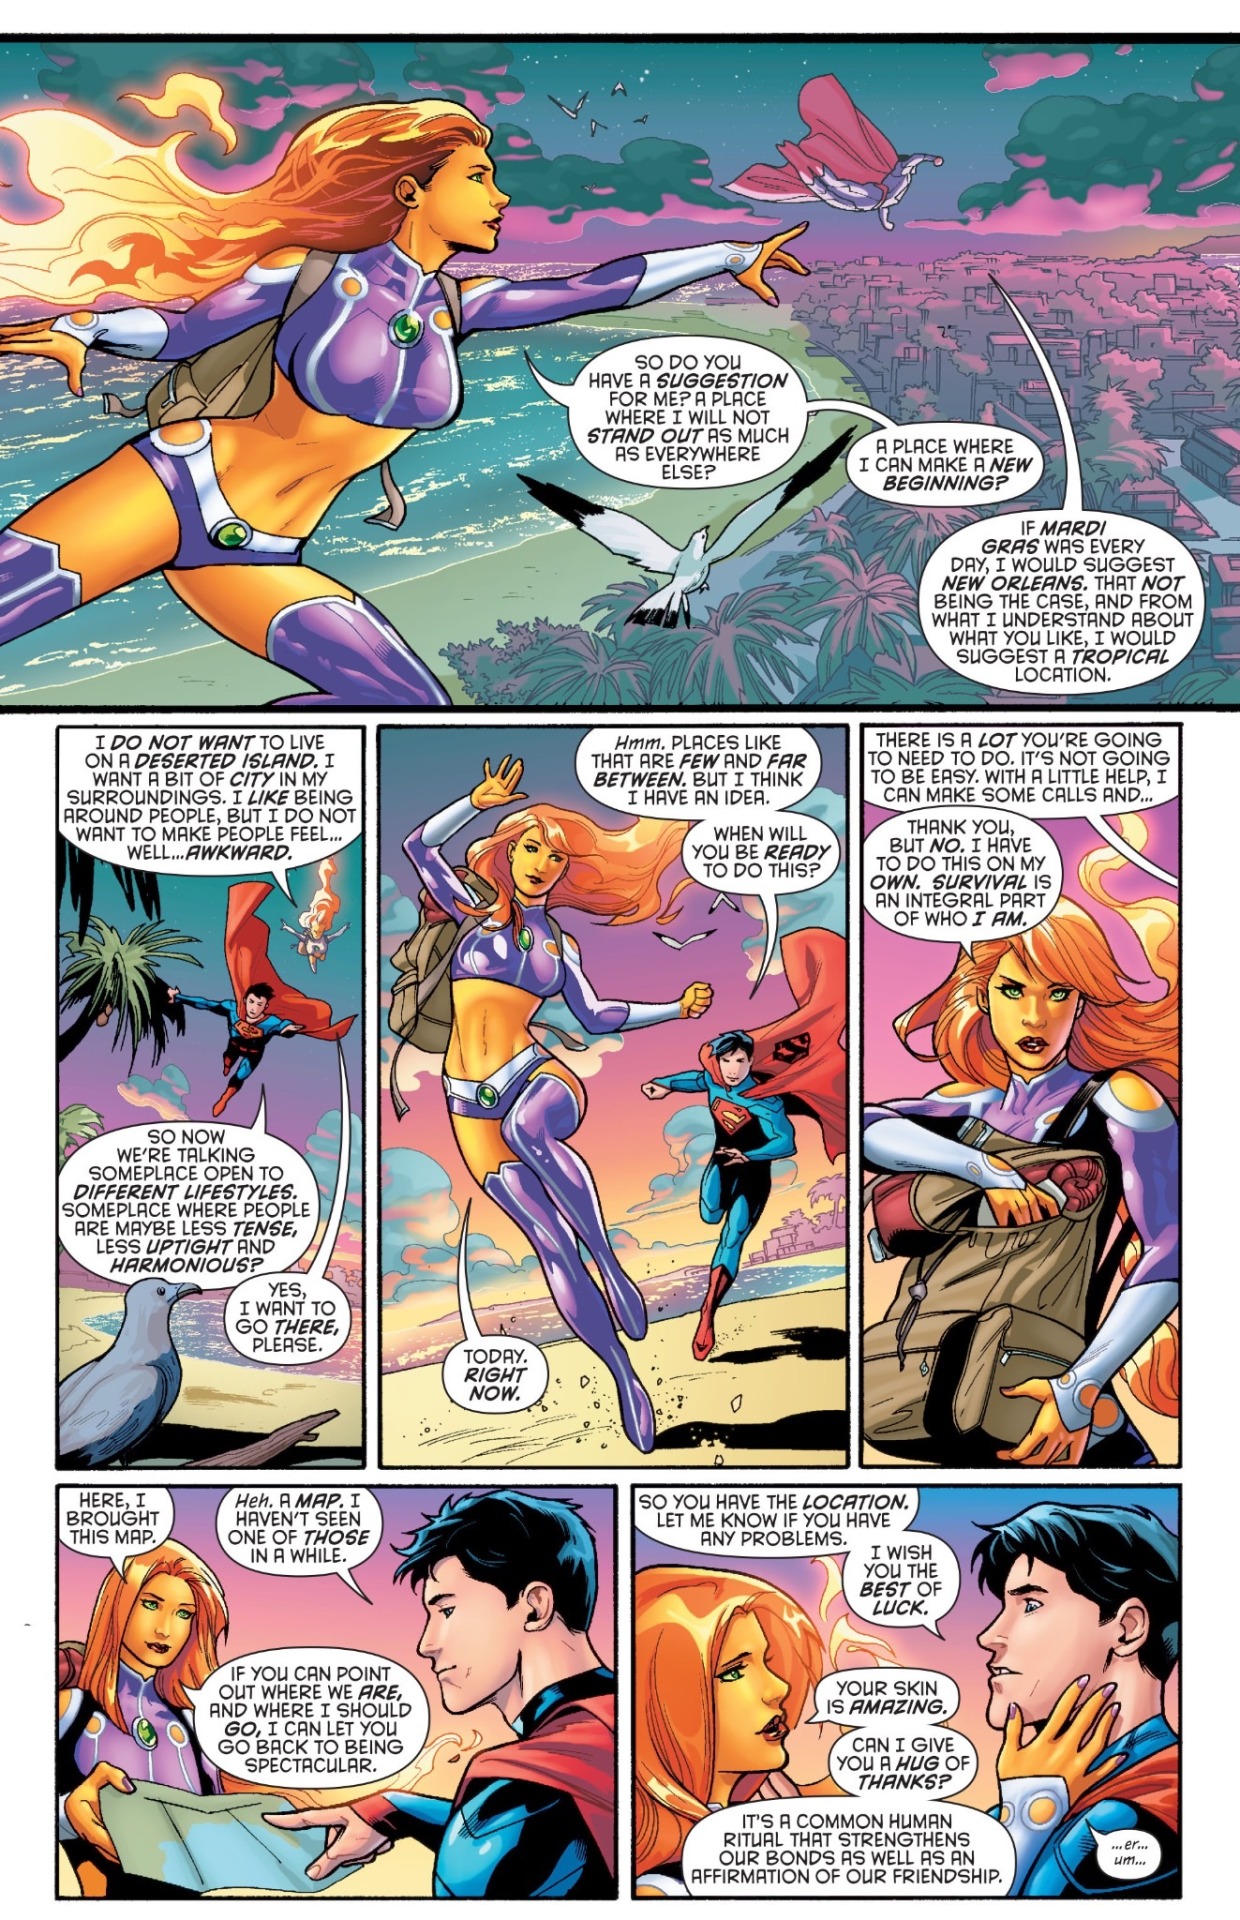 Divergence: StarfirePreview for June’s upcoming Starfire #1Starfire teams up with